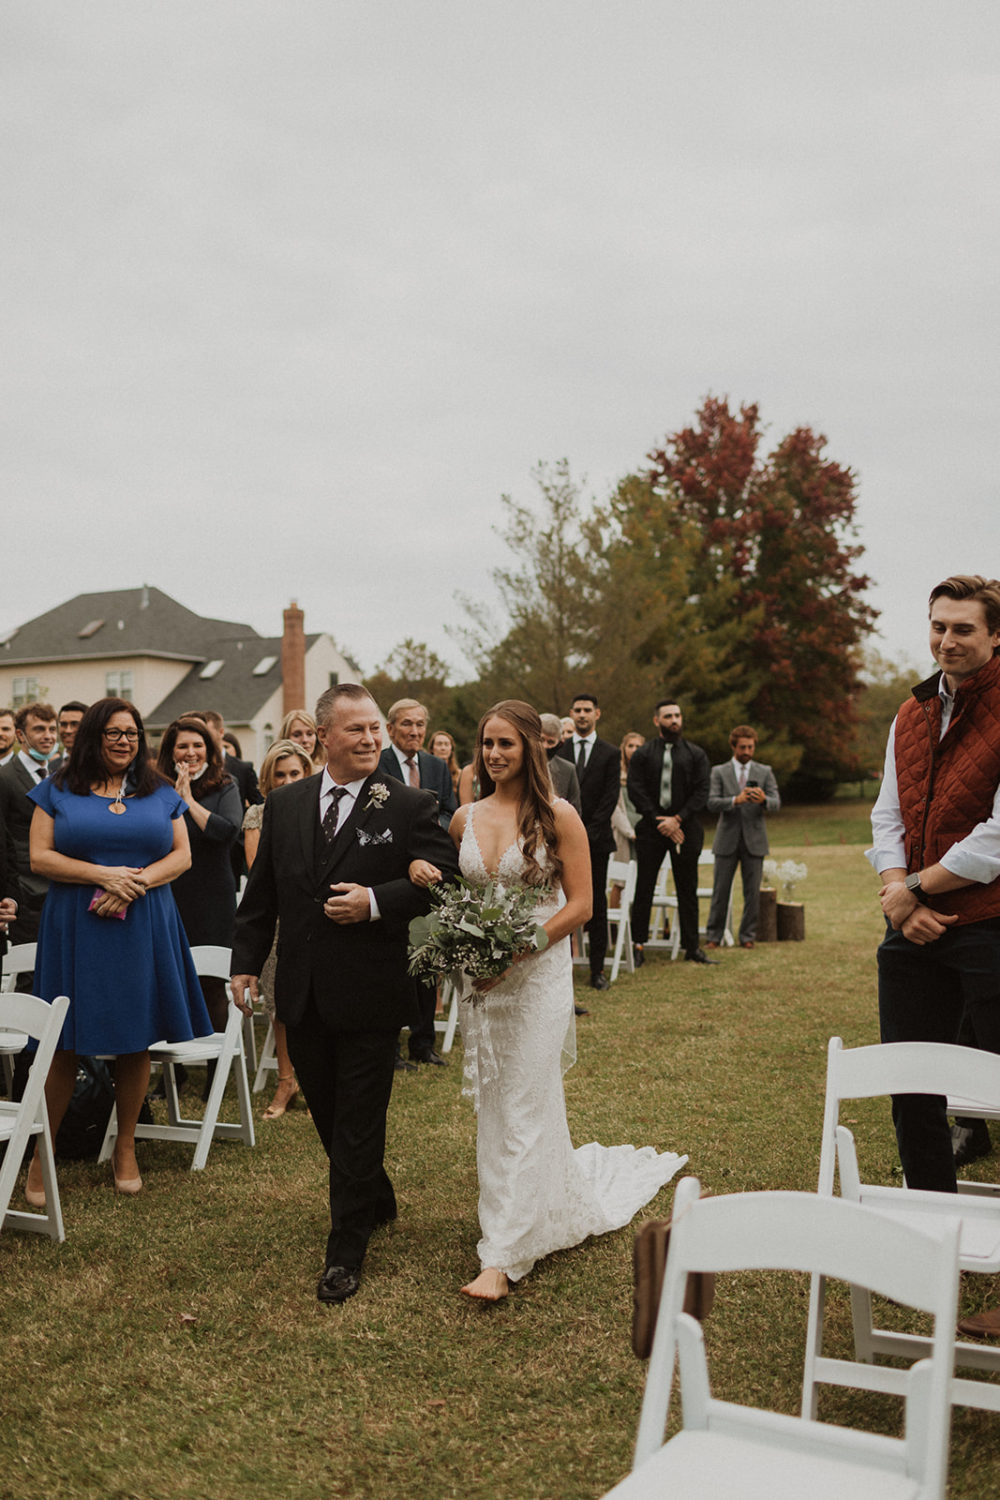 Bride walks down the aisle holding dad's arm